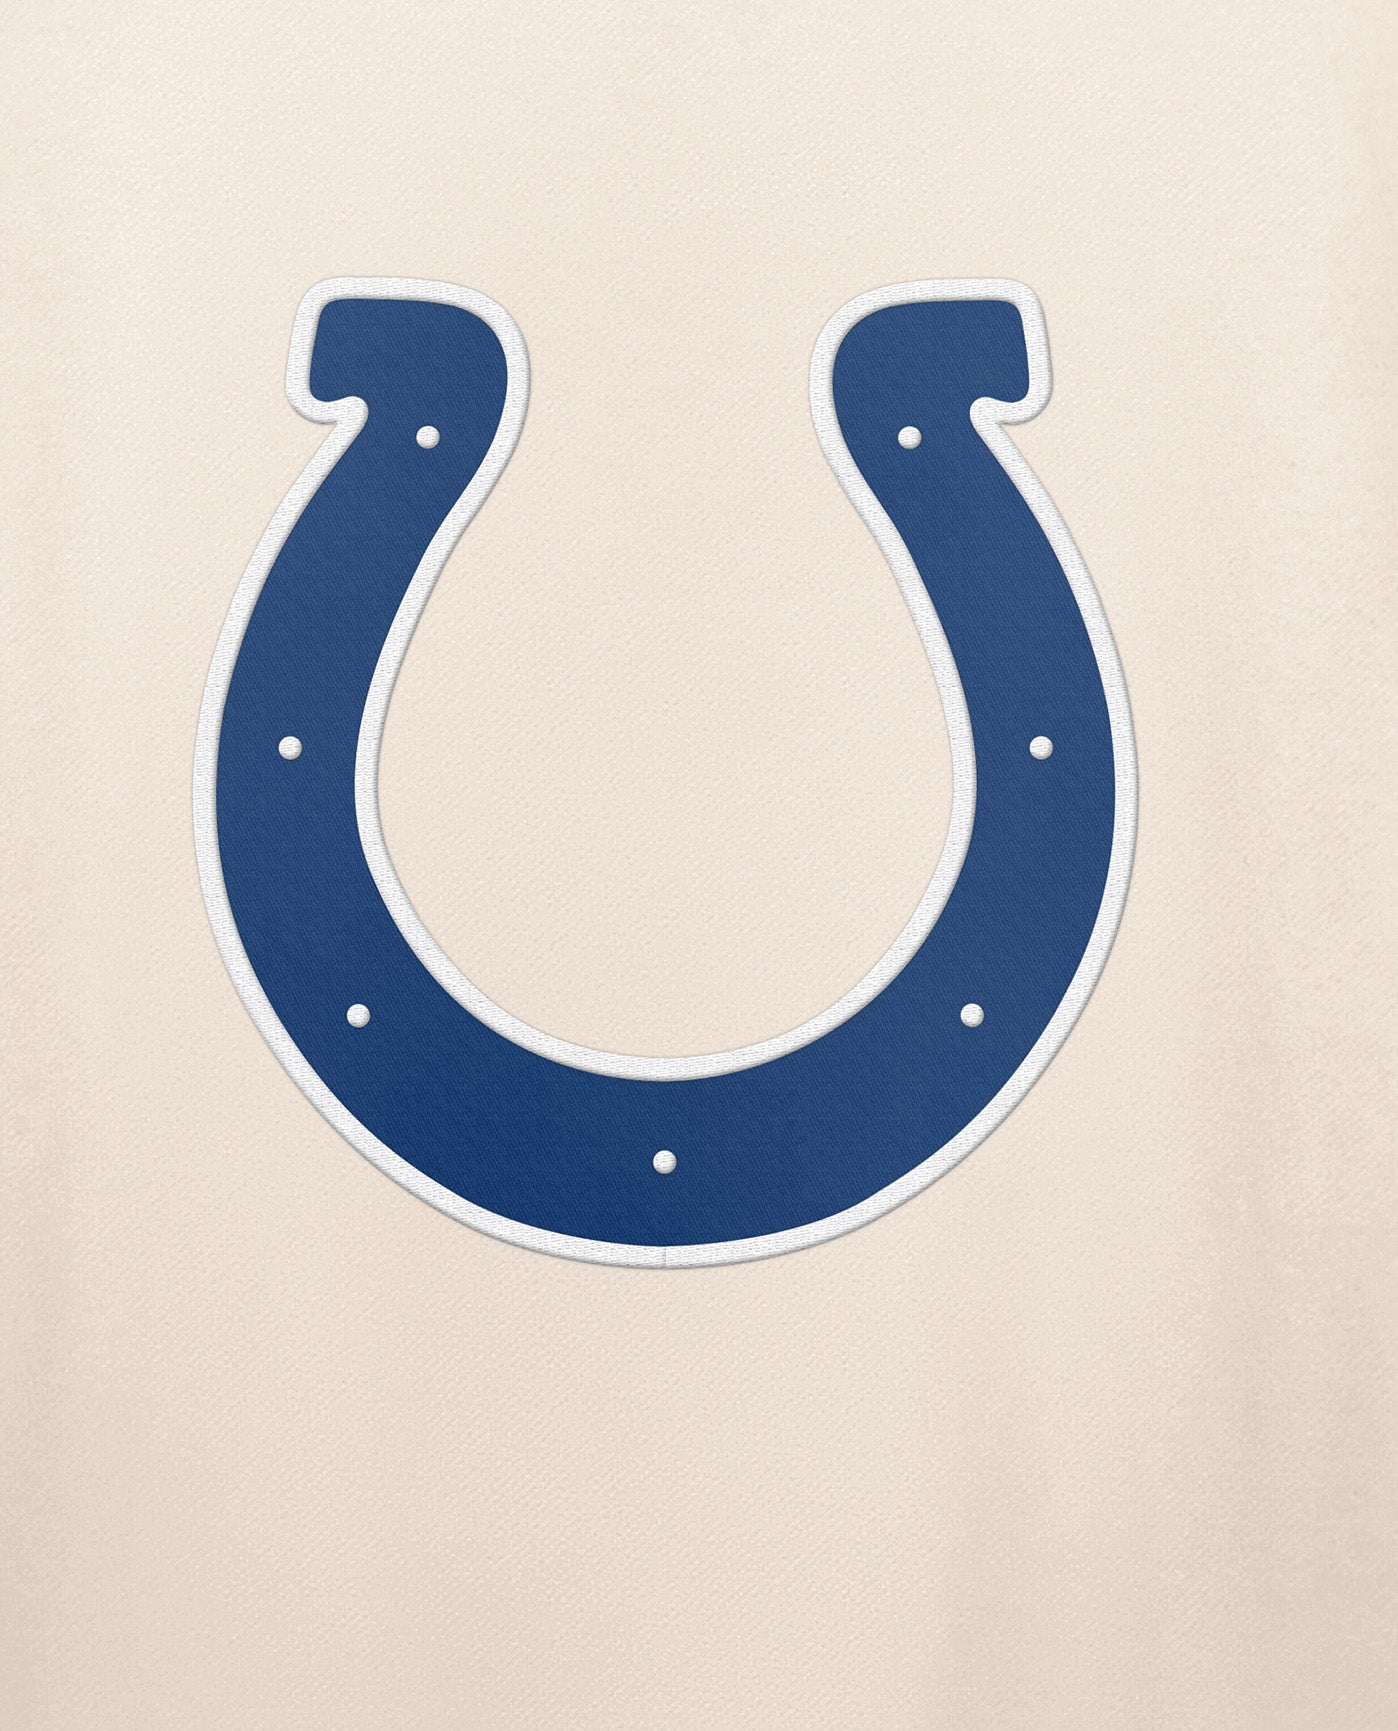 Team Logo On Chest Of Indianapolis Colts Team Crew Long Sleeve Shirt | Cream